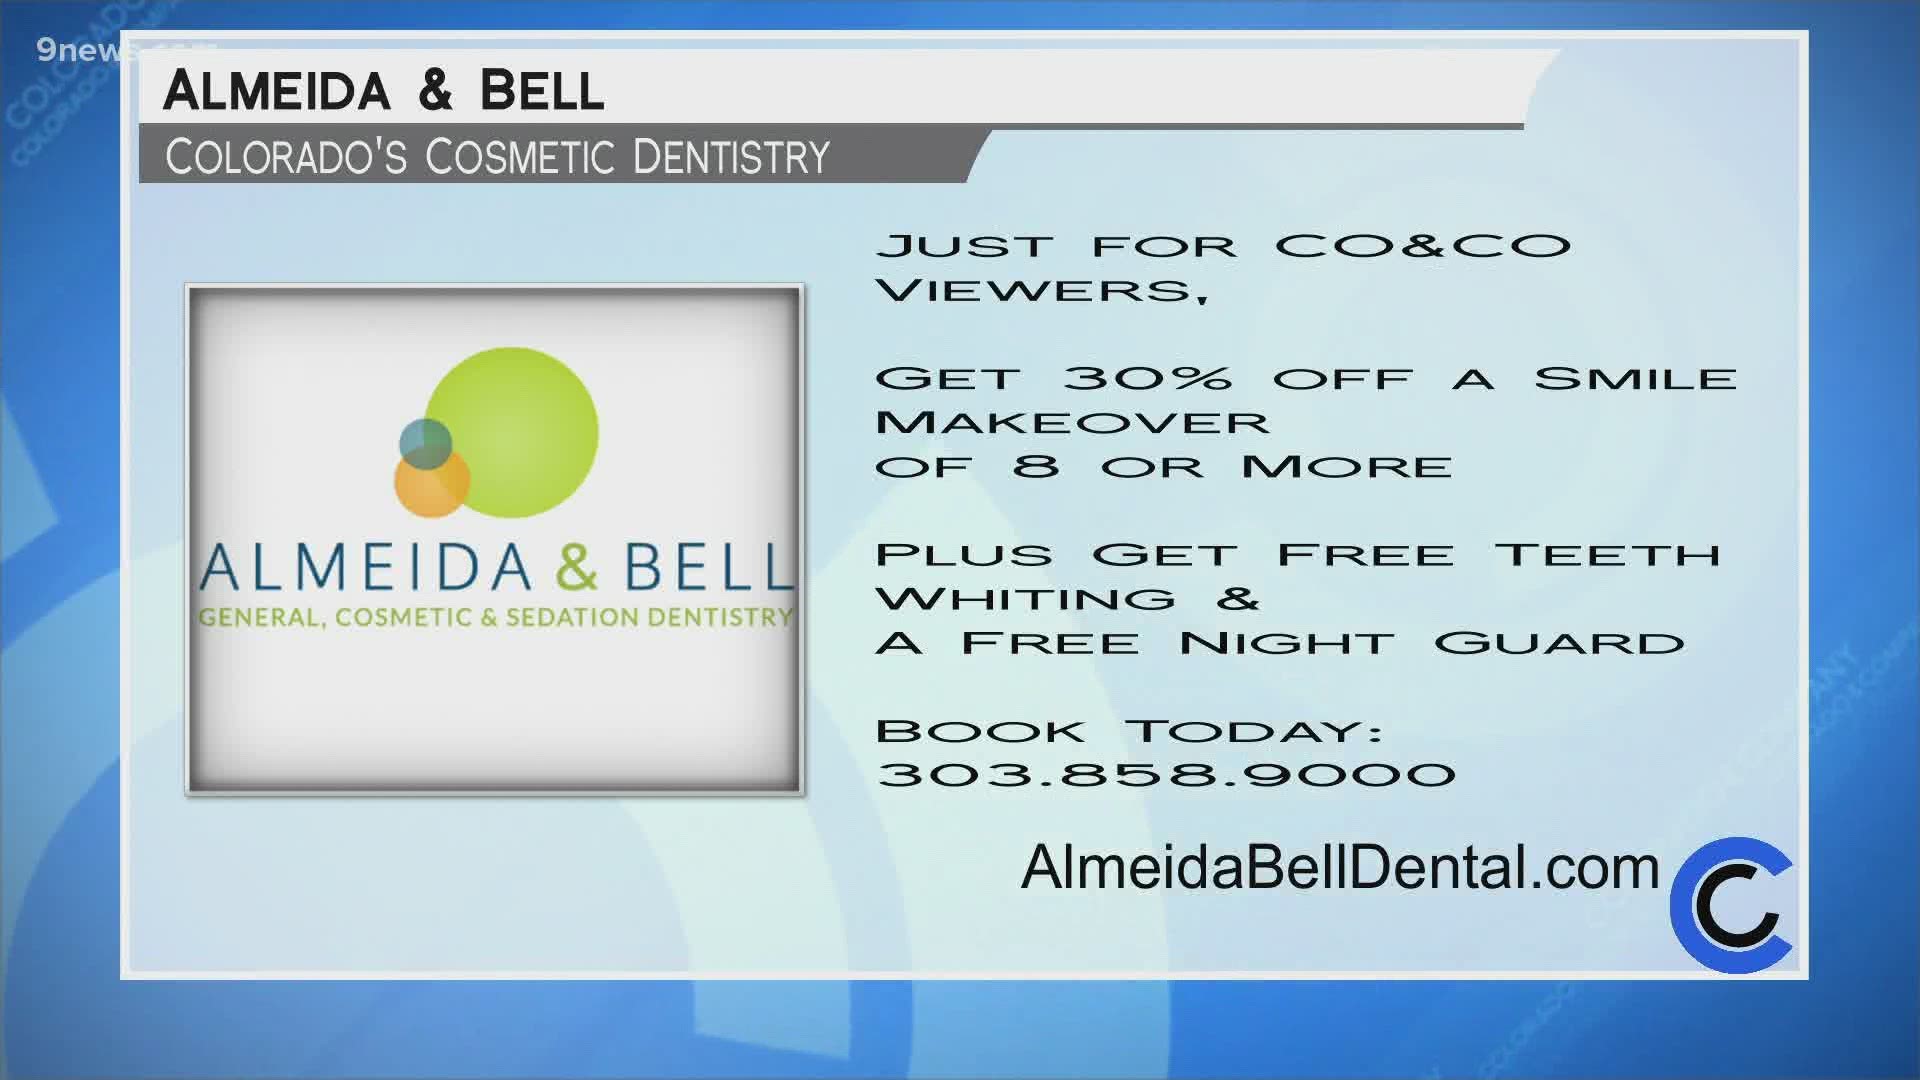 Right now you can get 30% off a smile makeover of 8 teeth or more! Call 303.858.9000 or visit AlmeidaBellDental.com to learn more.